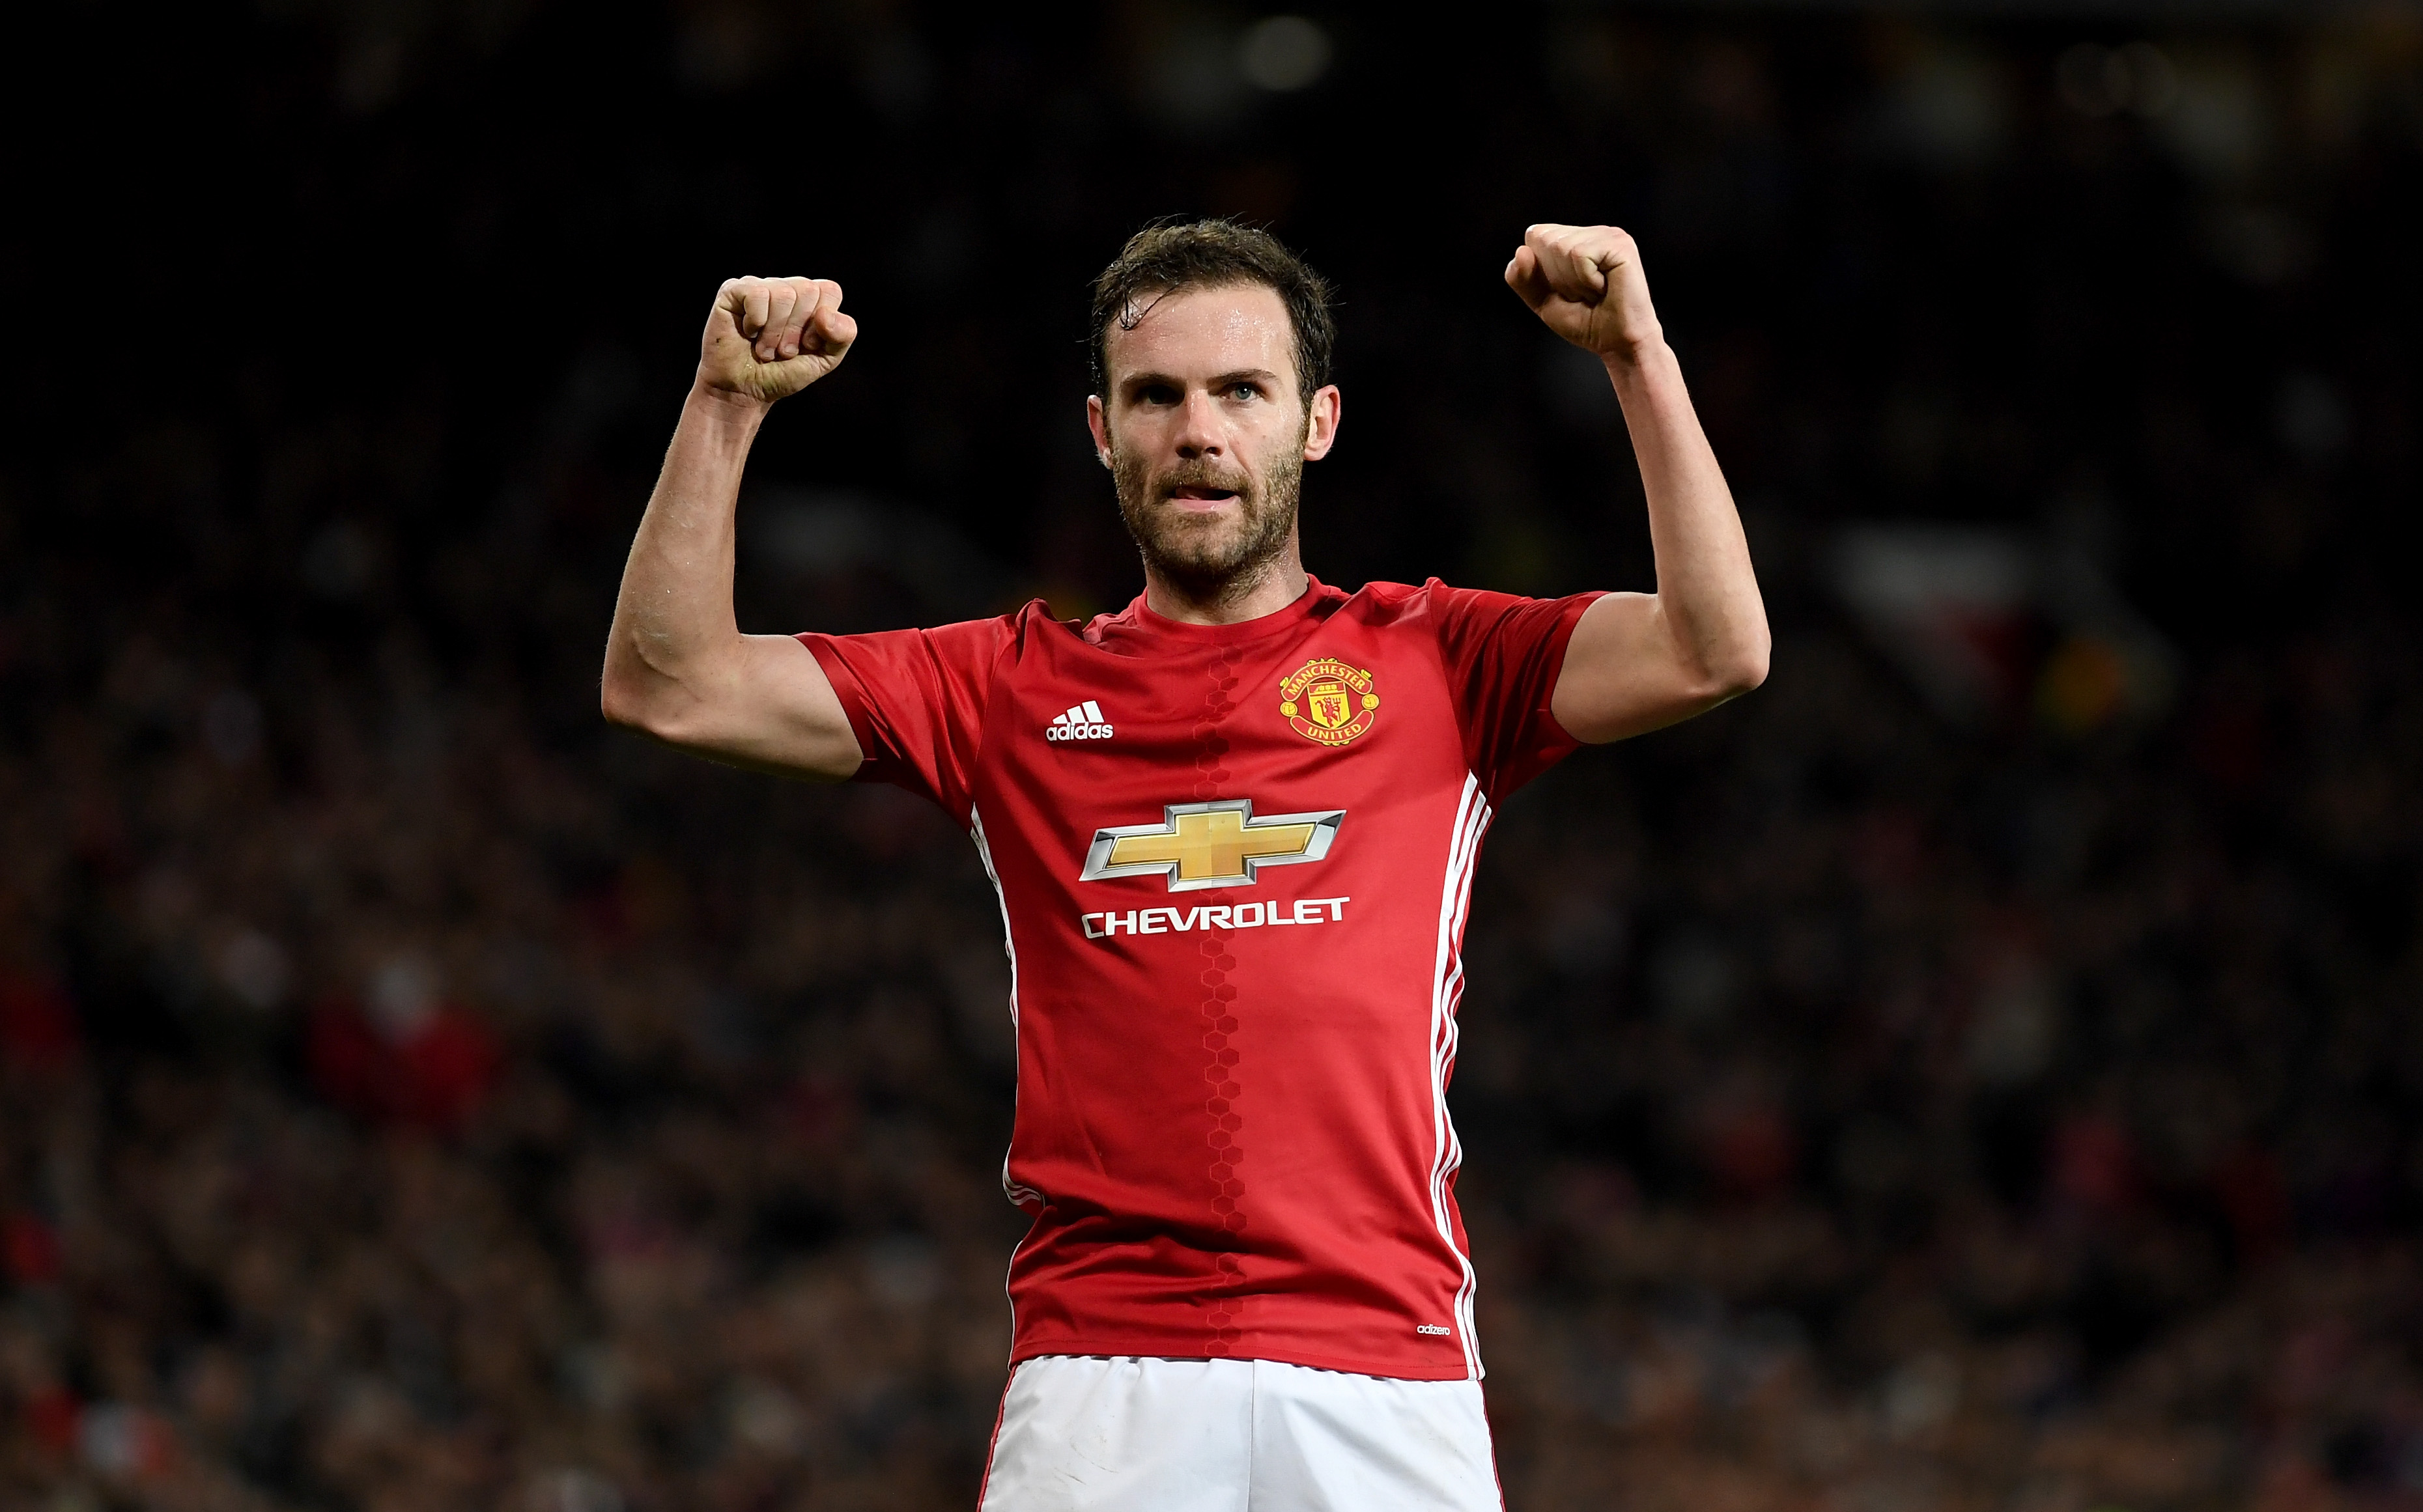 MANCHESTER, ENGLAND - MARCH 16:  Juan Mata of Manchester celebrates after scoring the opening goal during the UEFA Europa  League Round of 16 second leg match between Manchester United and FK Rostov at Old Trafford on March 16, 2017 in Manchester, United Kingdom.  (Photo by Ross Kinnaird/Getty Images)